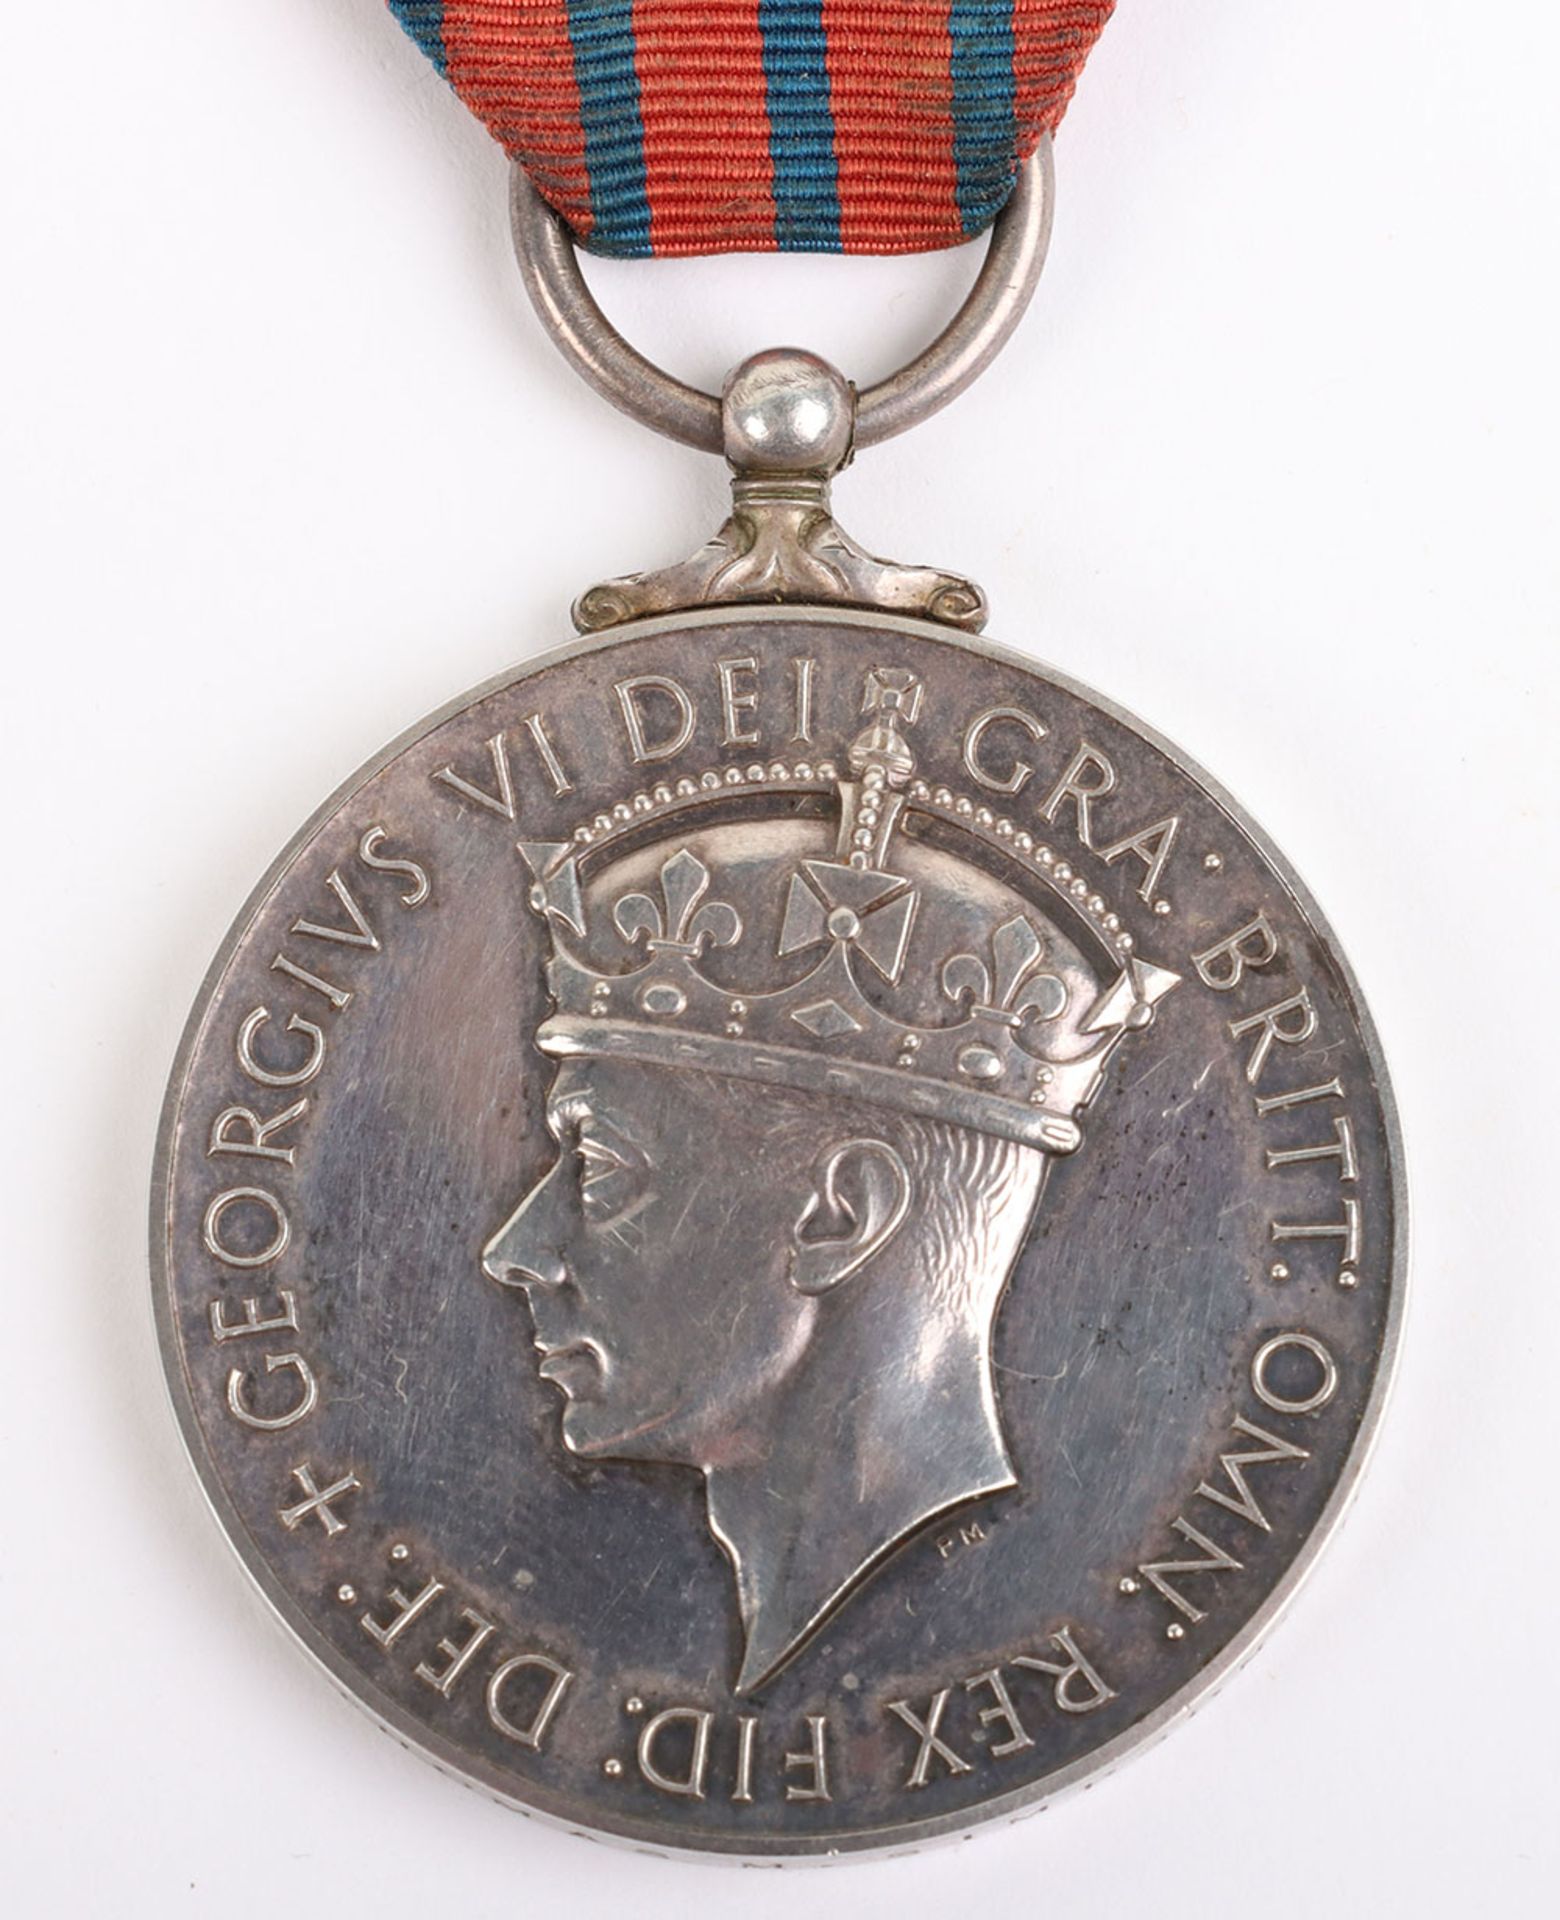 Second World War Birmingham Blitz Home Guard George Medal Awarded for Gallantry in Rescuing People T - Image 2 of 8